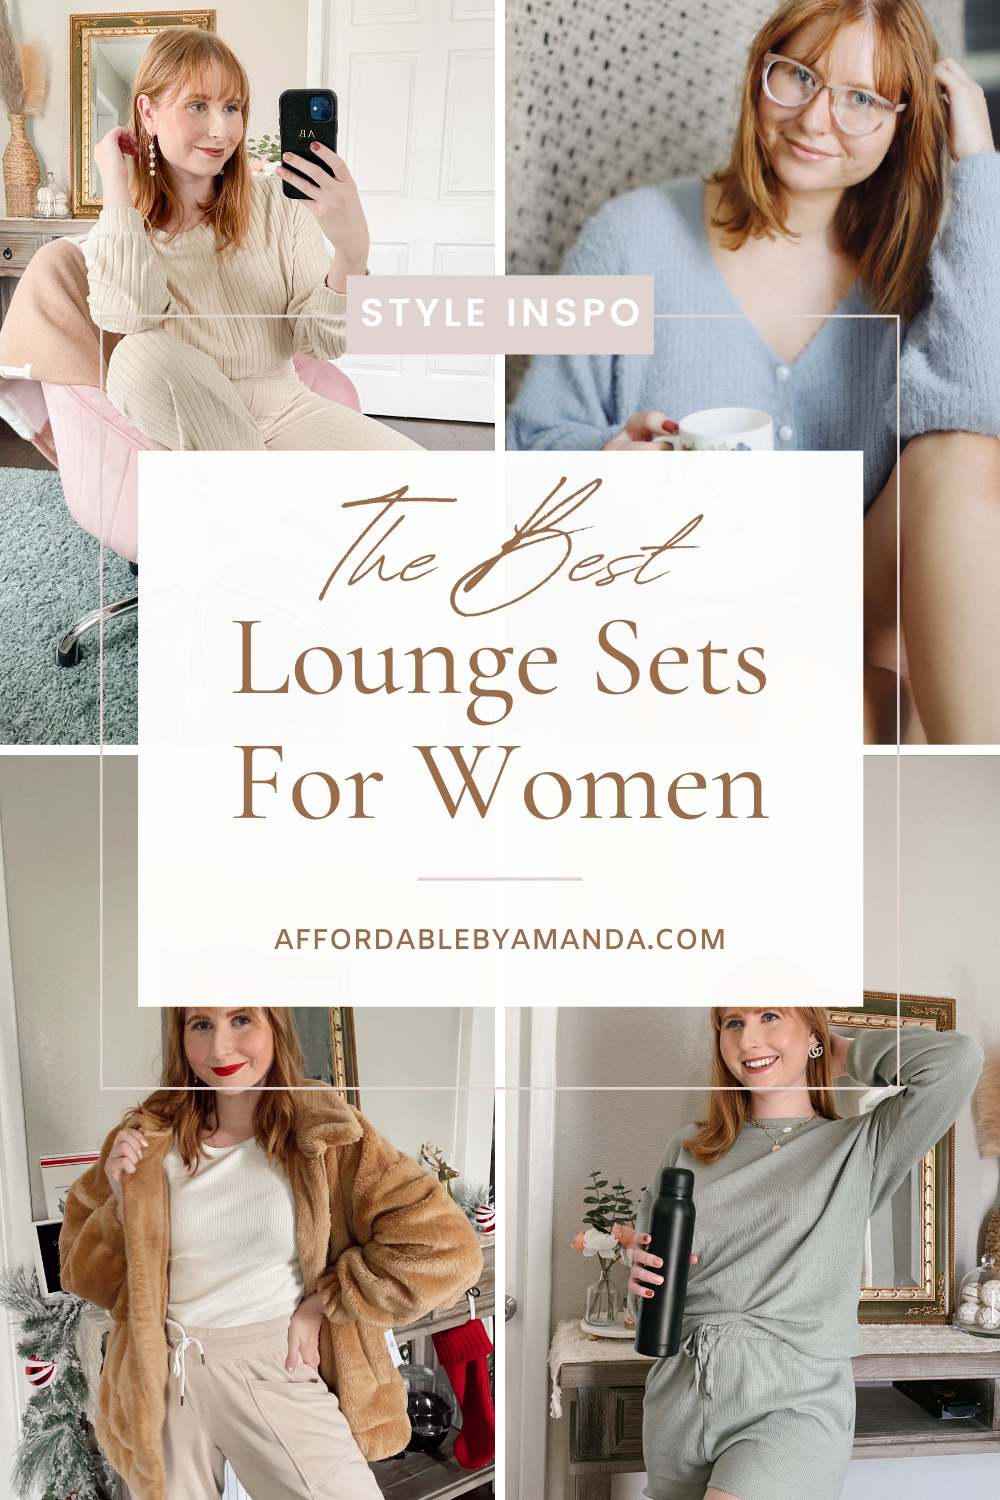 Lounge Sets for Women - Affordable by Amanda